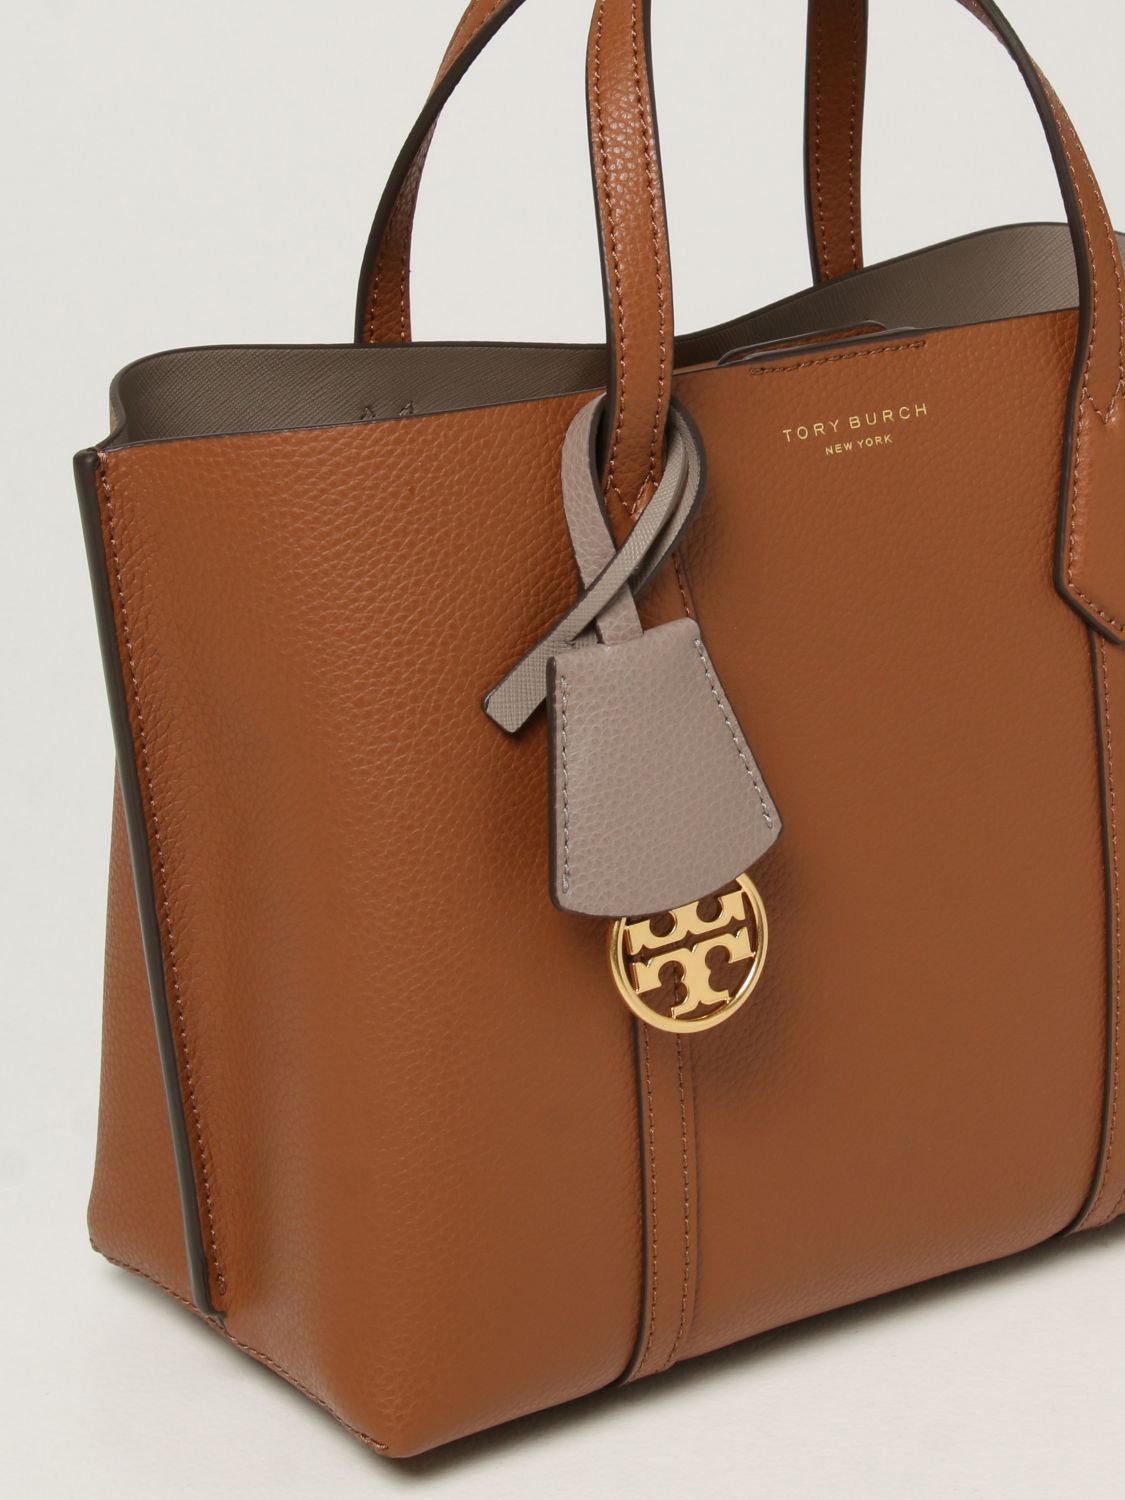 TORY BURCH: Perry bag in textured leather - Beige | Tory Burch handbag 81928  online on 